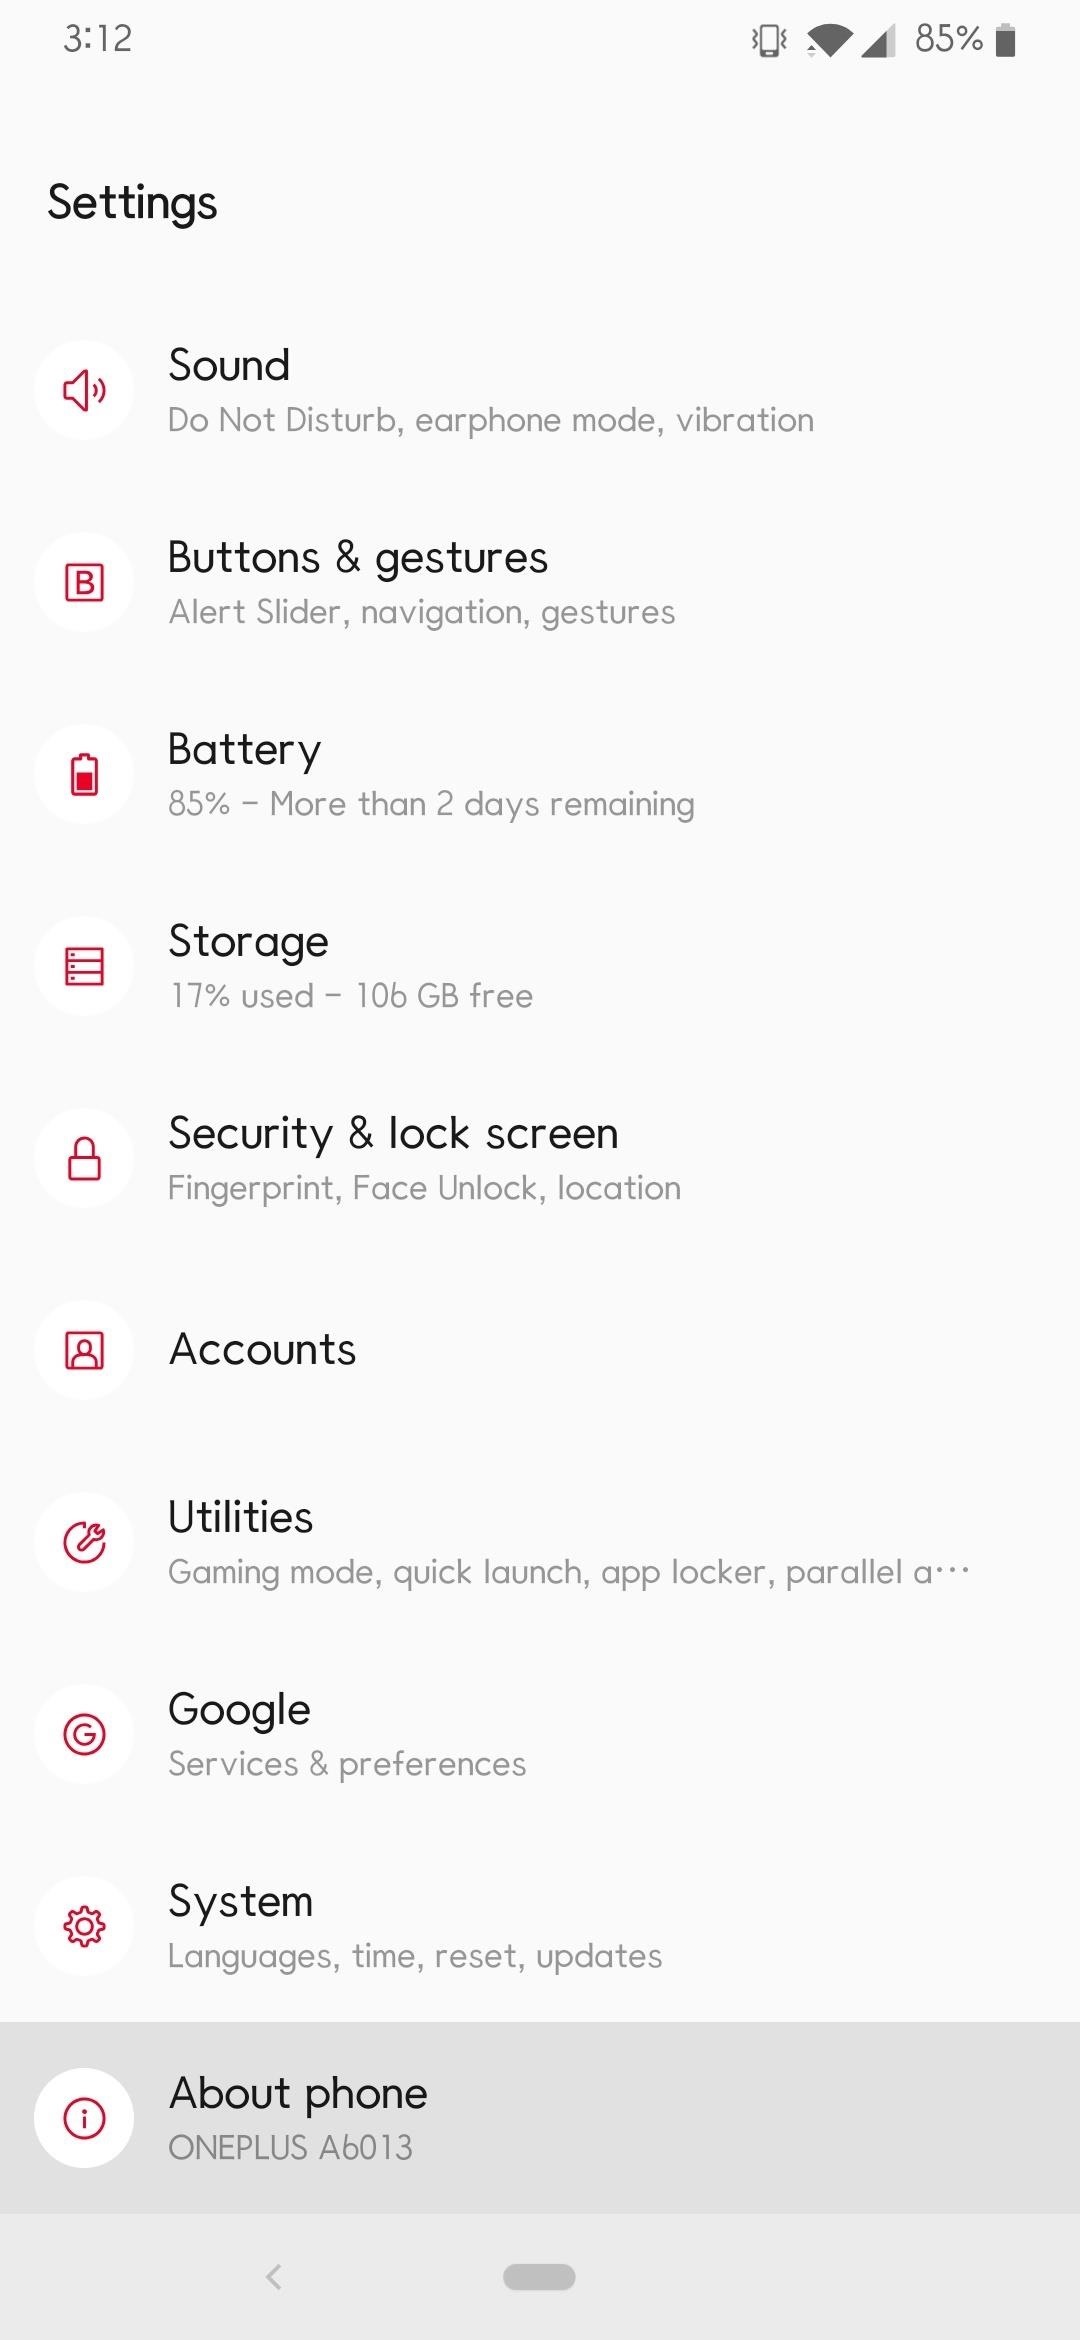 How to Unlock the Bootloader on Your OnePlus 6T